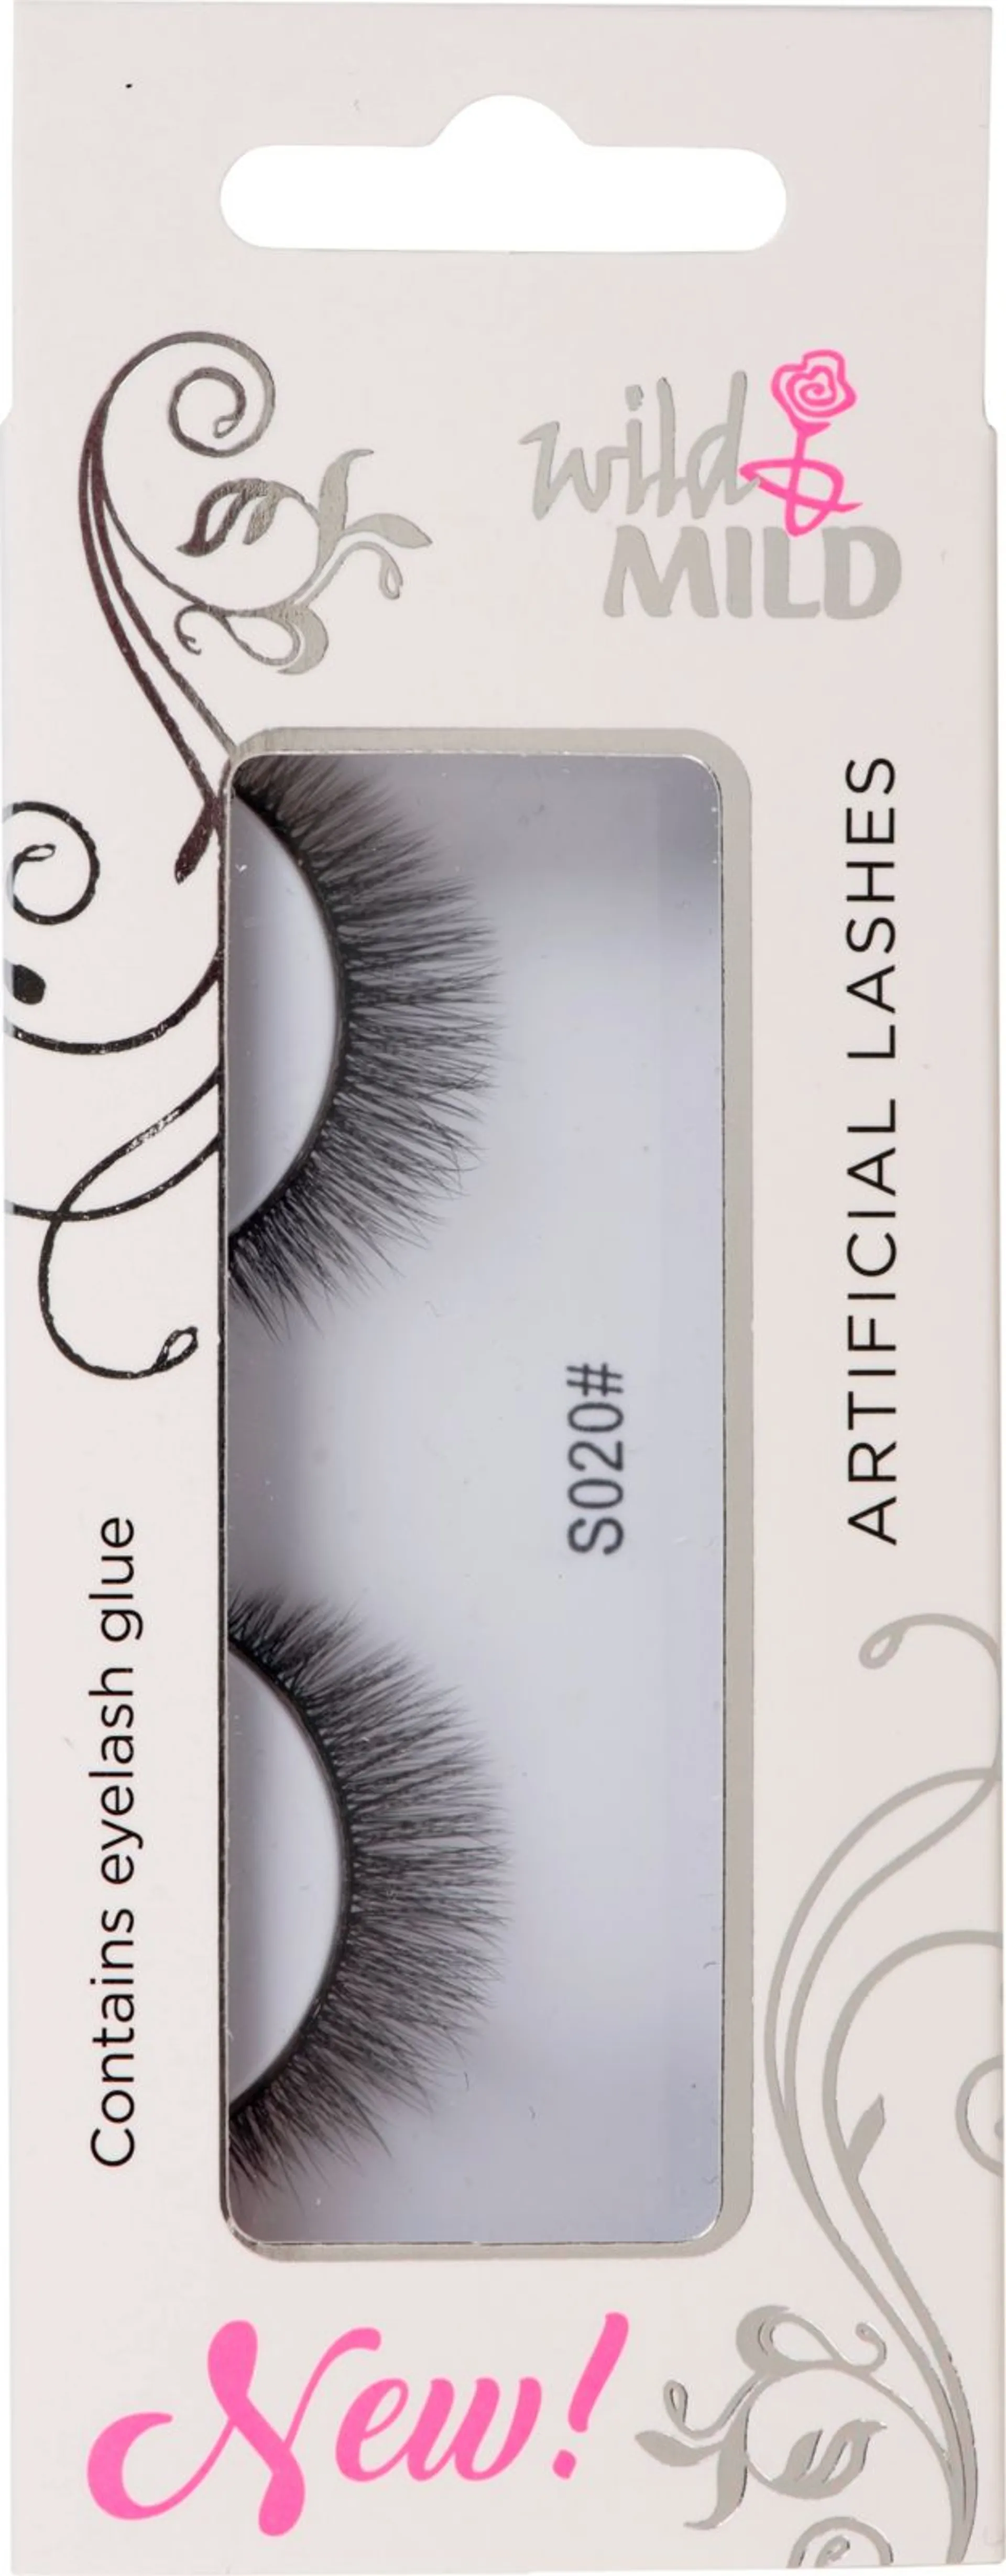 S020 Effortless Beauty Artificial Lashes Wild&Mild - 1